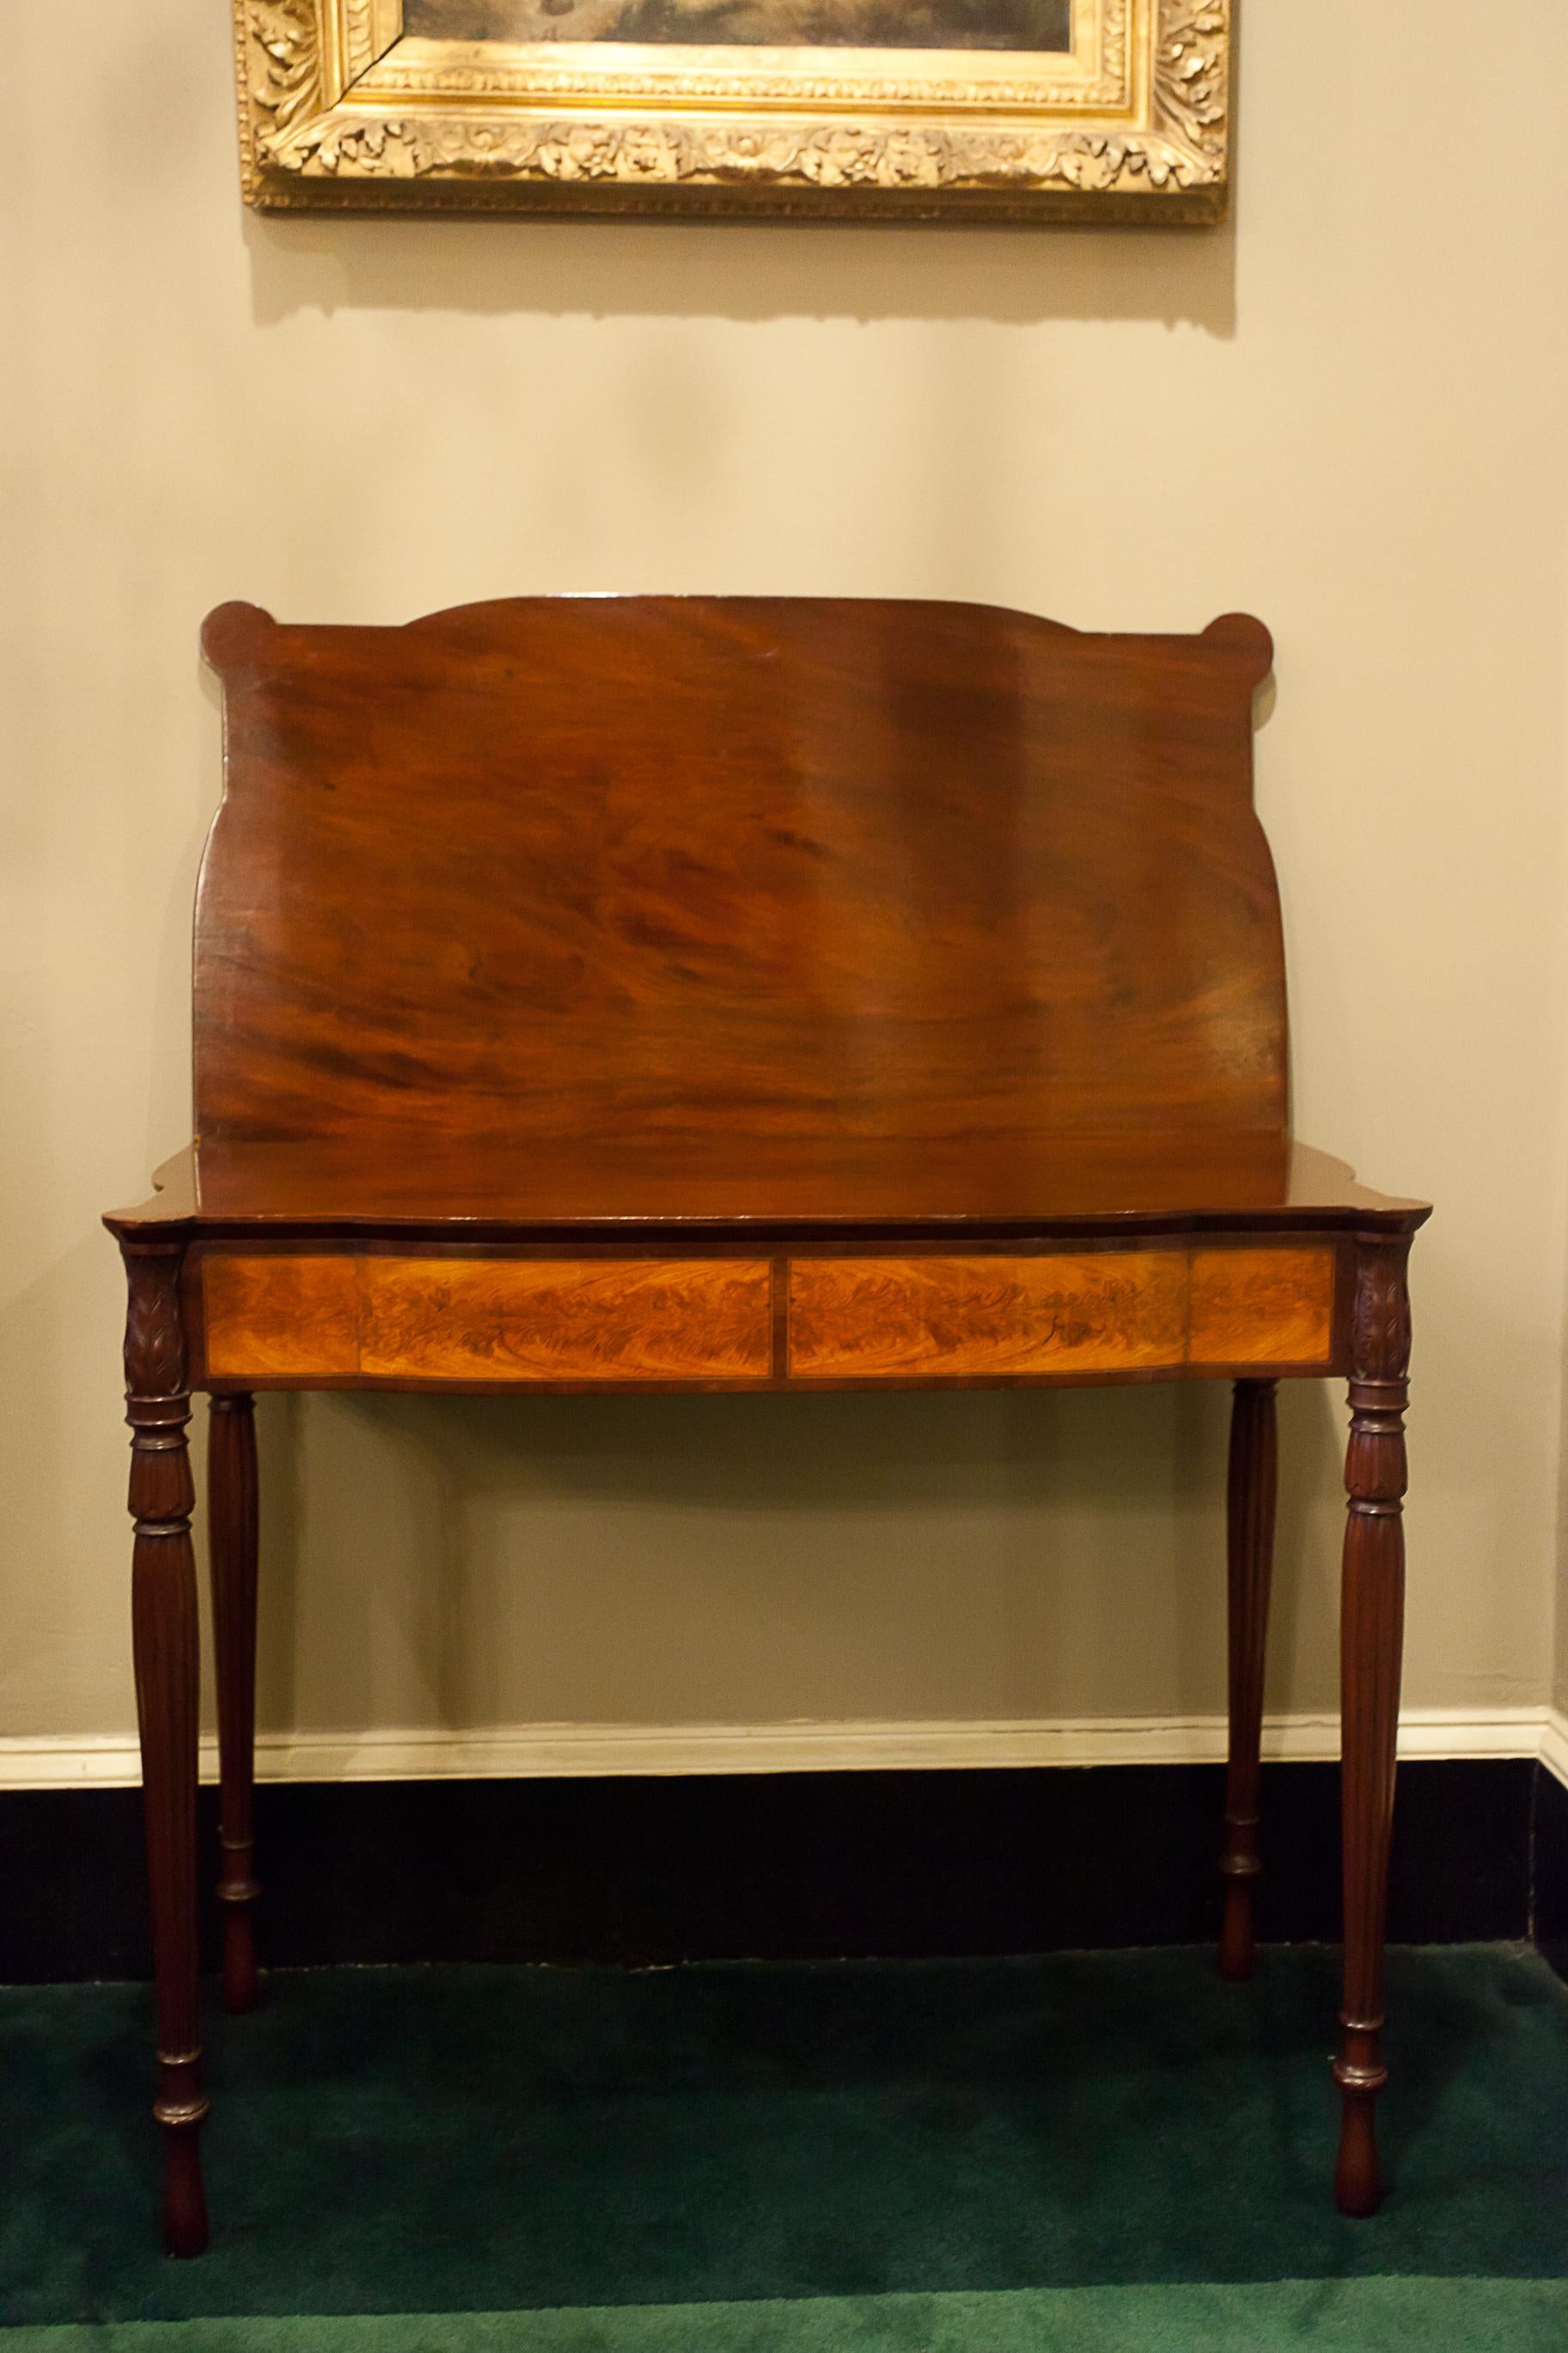 19th Century Centennial Federal Style Sheraton Mahogany and Flaming Birch Card Table